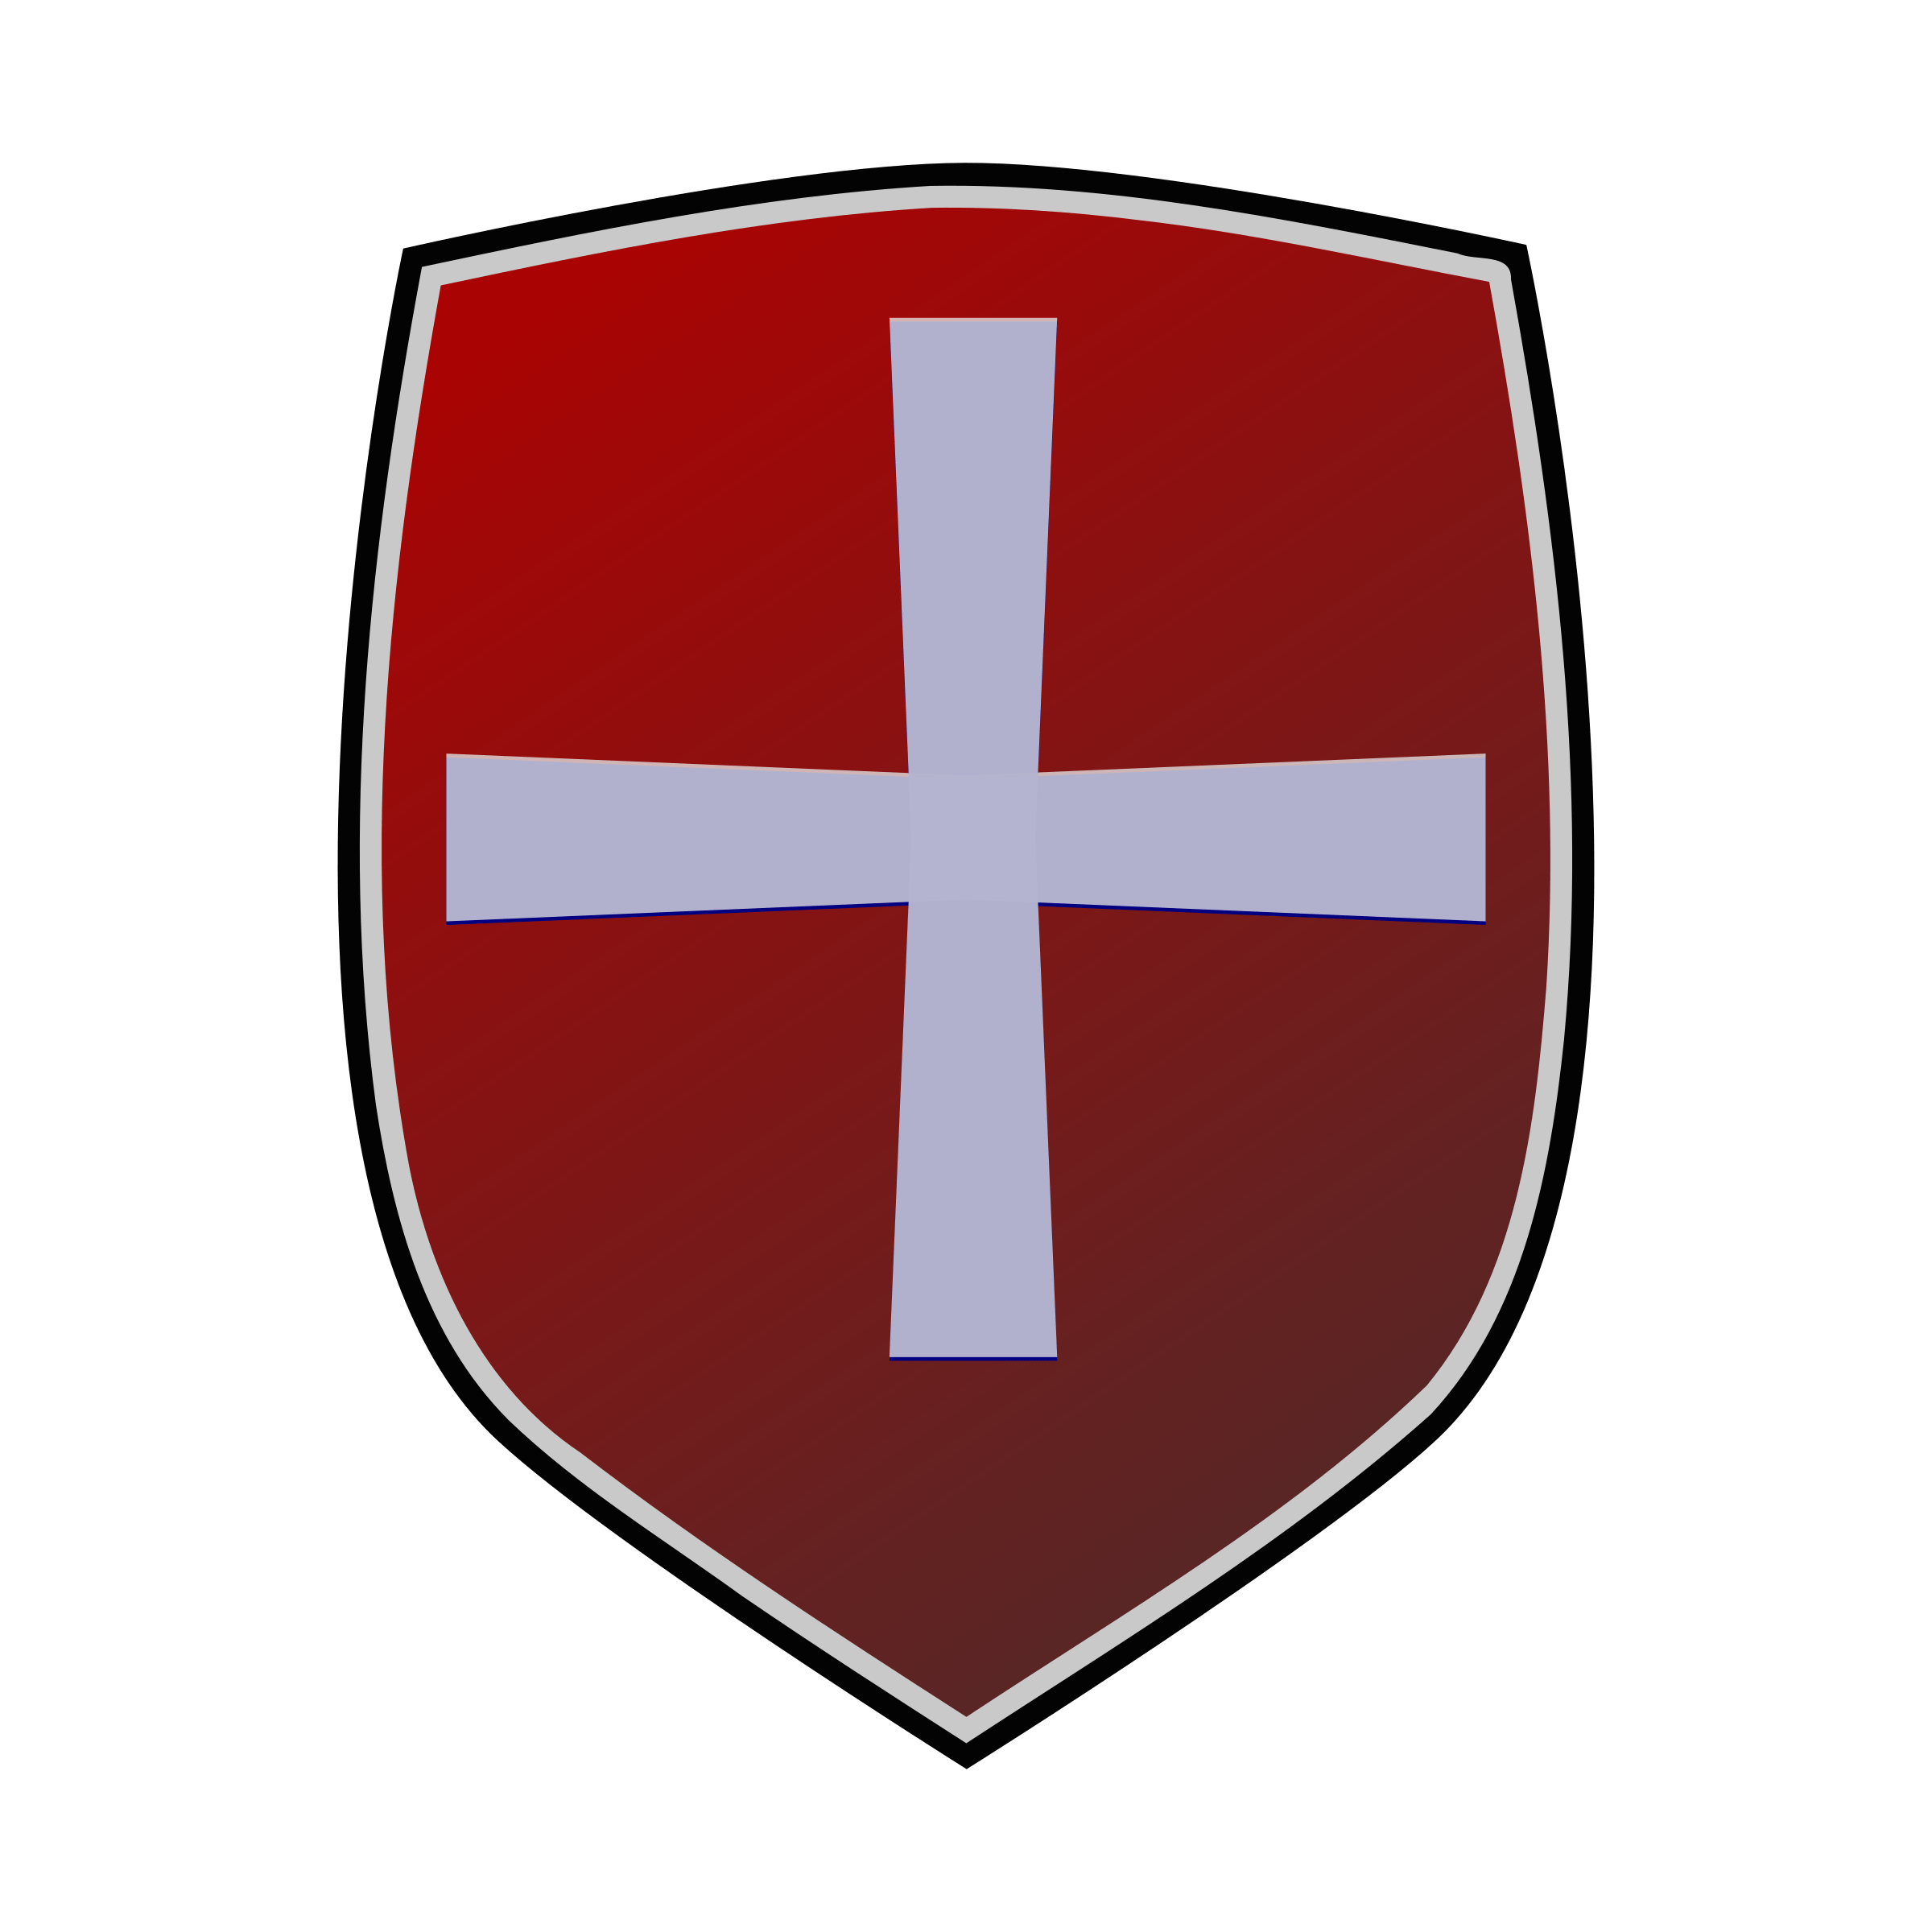 Red Shield White Cross Logo - Clipart - Red shield